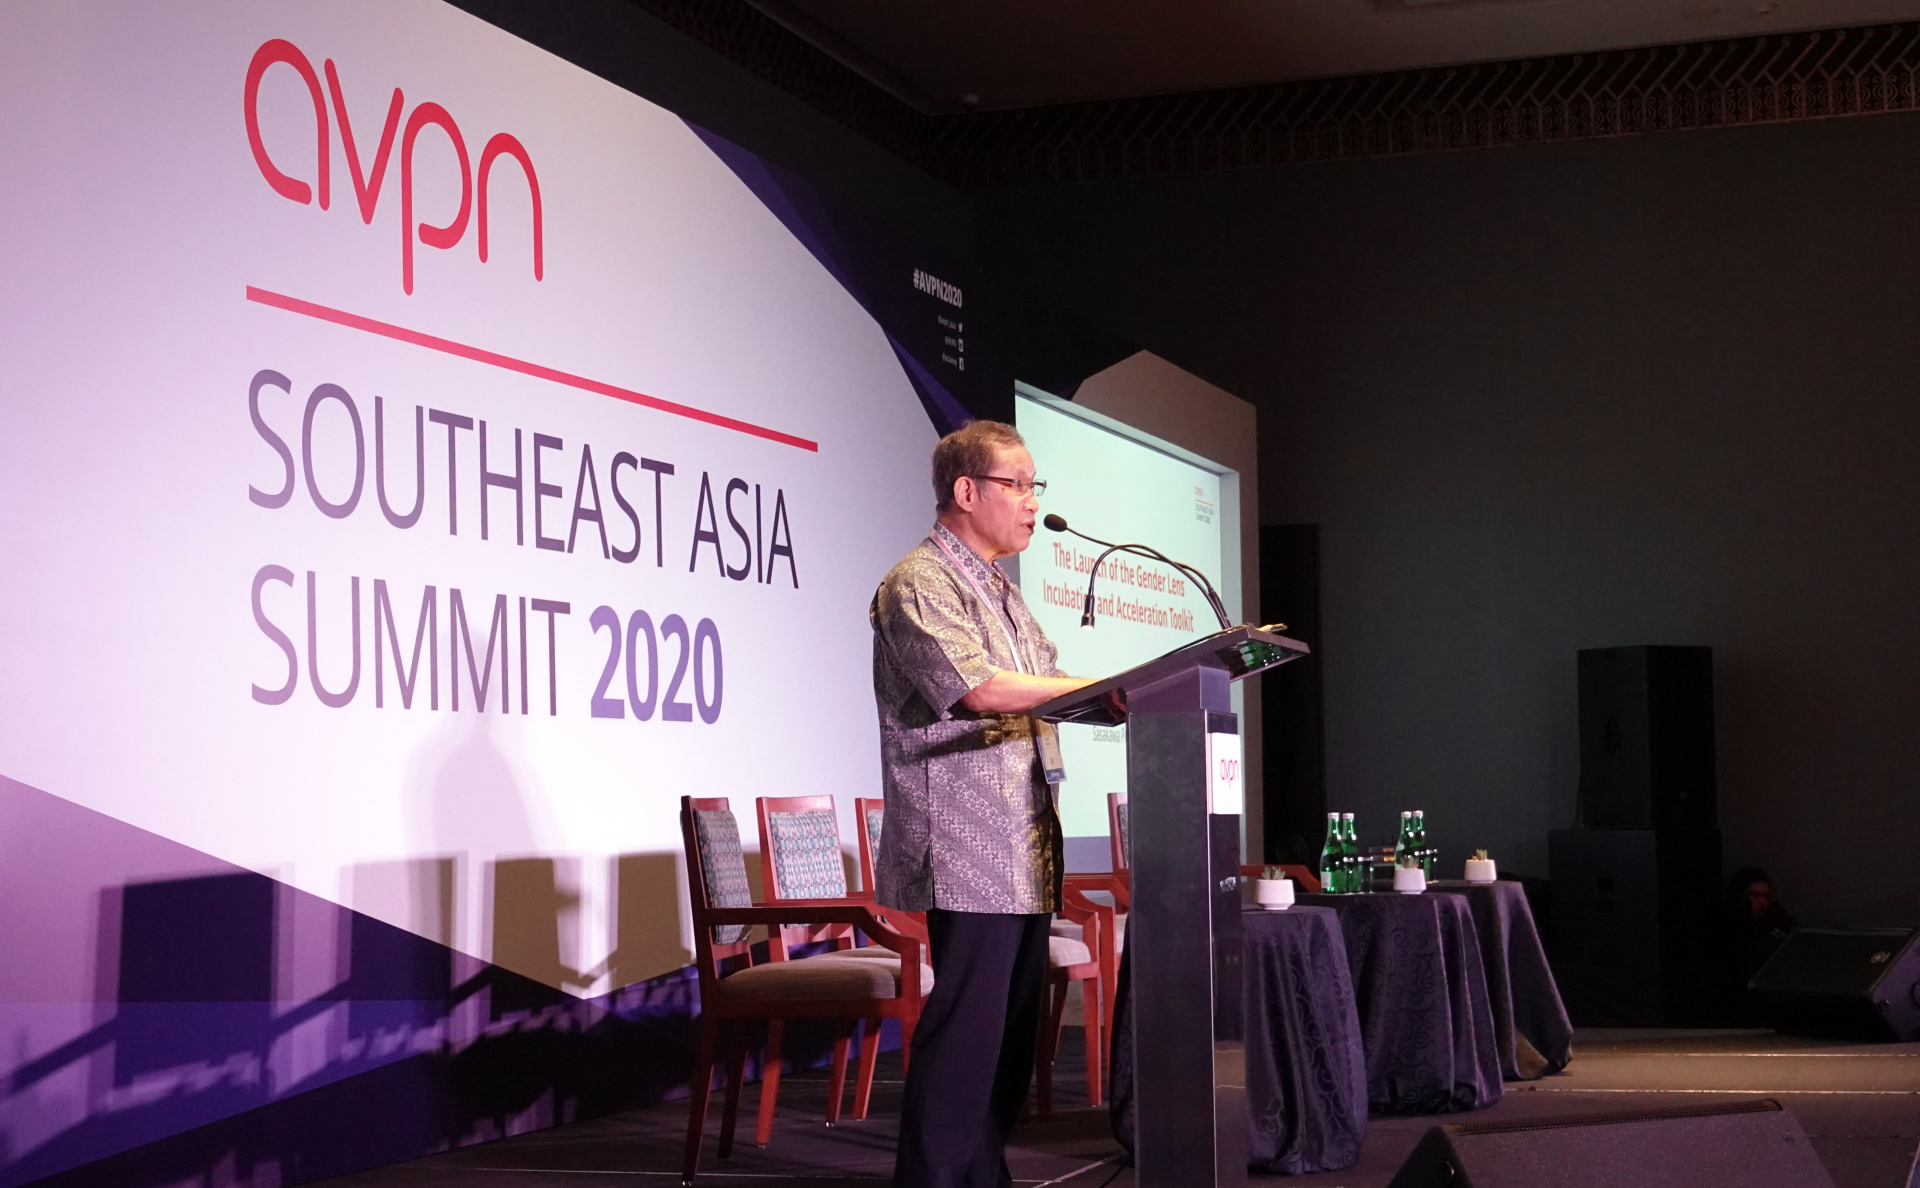 SPF President Shuichi Ohno launched the GLIA Toolkit at the plenary session at the AVPN Southeast Asia Summit.